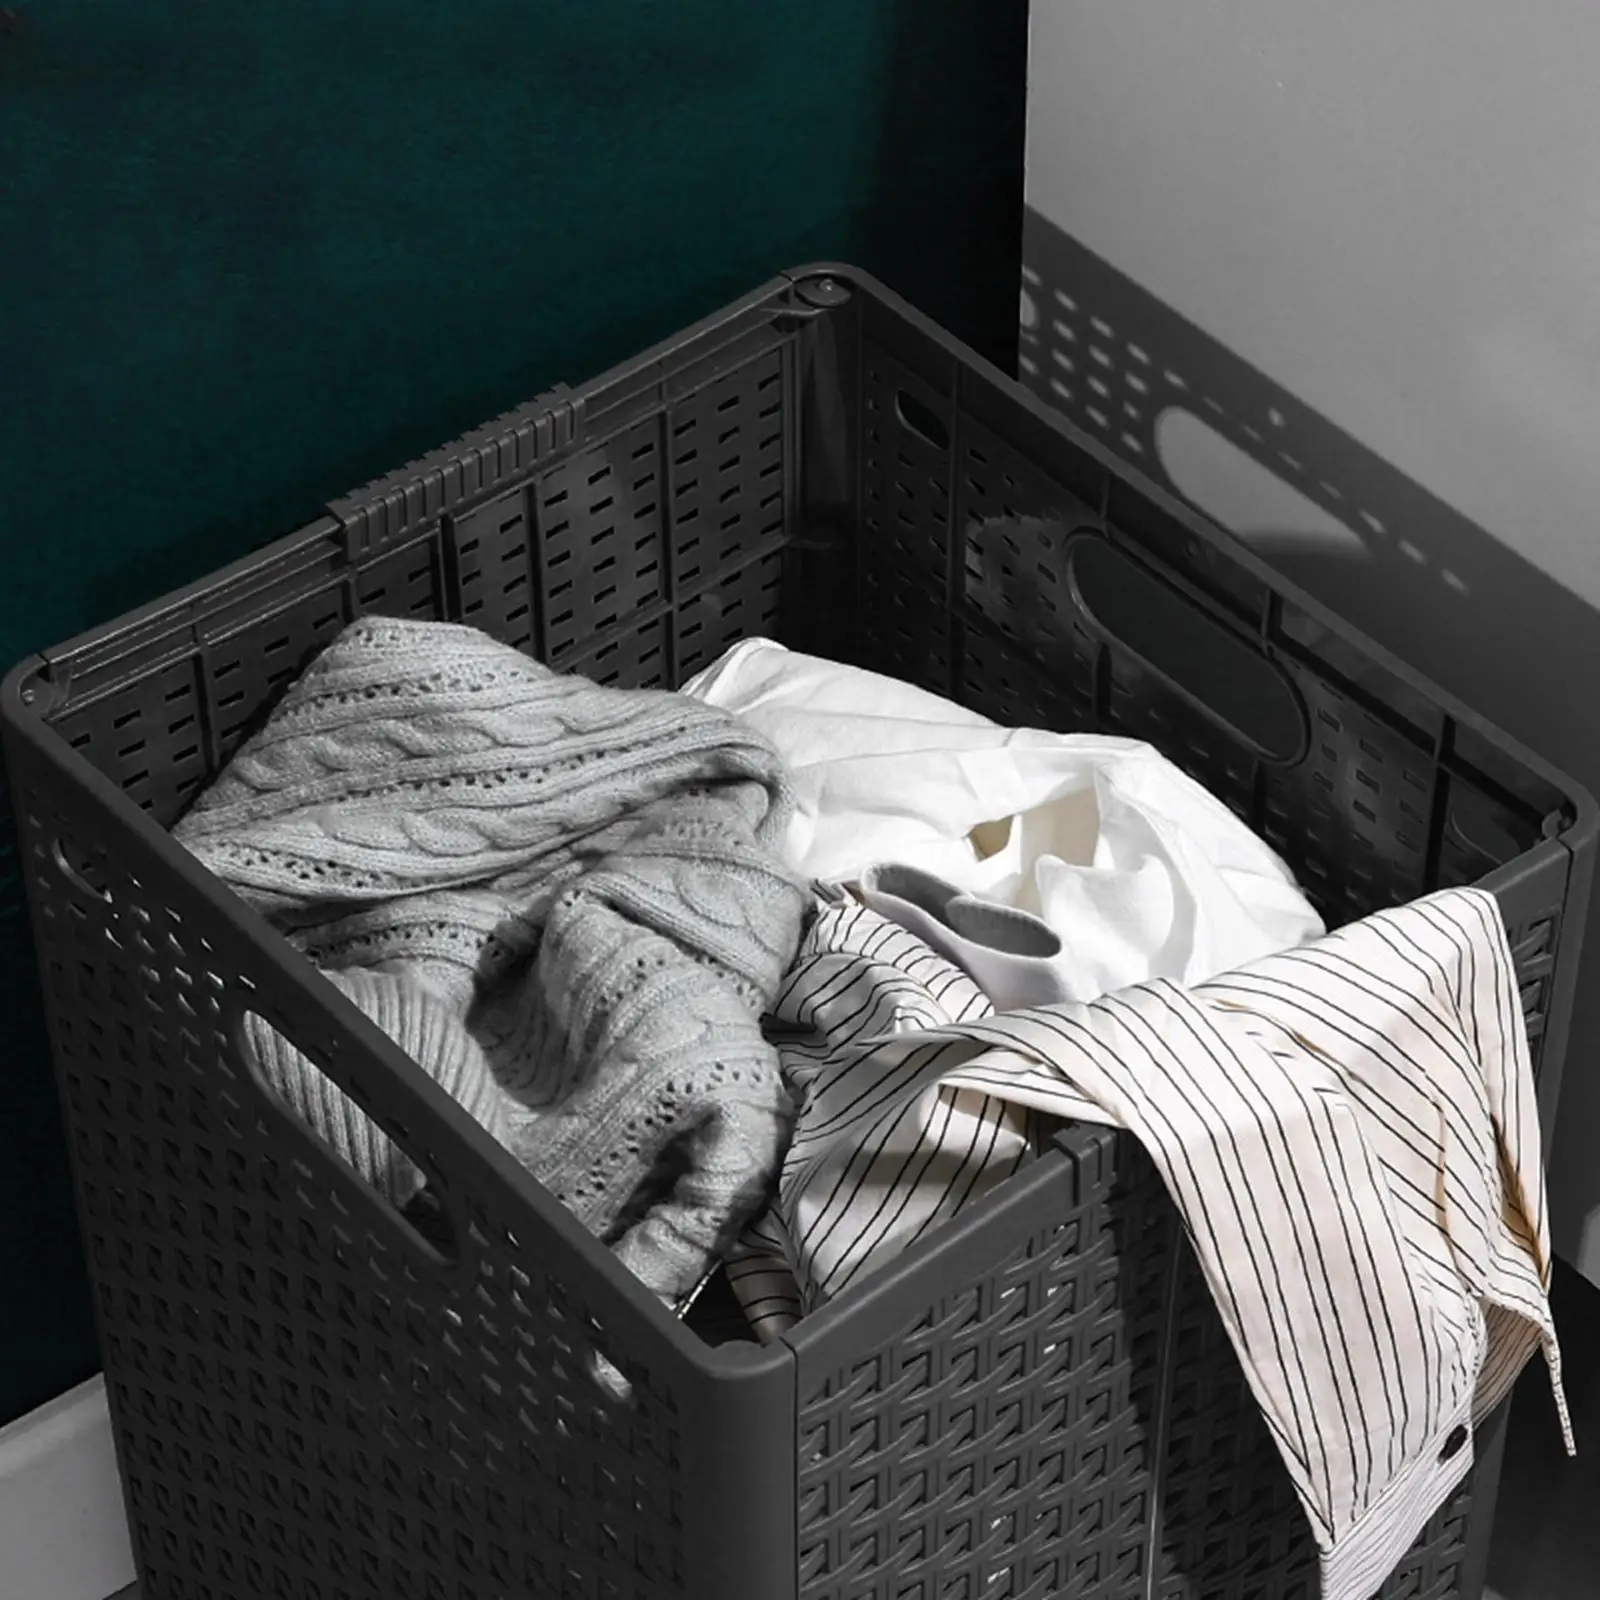 Collapsible Laundry Basket Large Sized with Handles for Laundry Room Bedroom